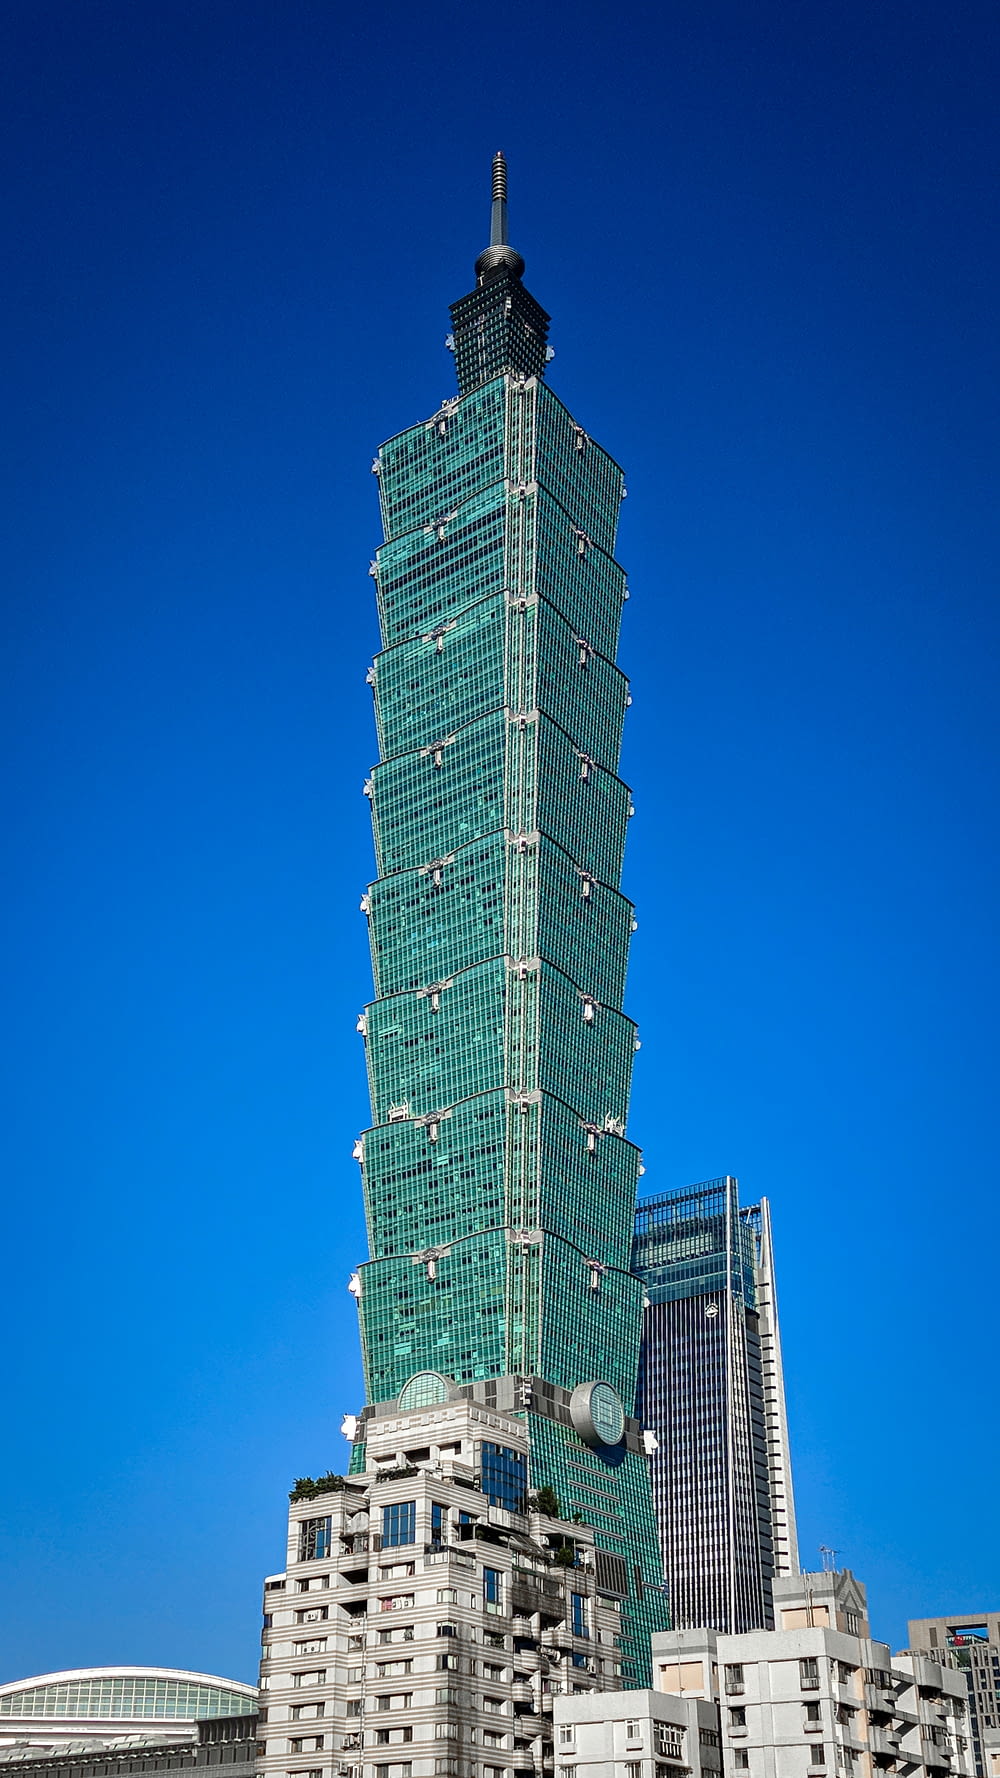 green and white high rise building under blue sky during daytime